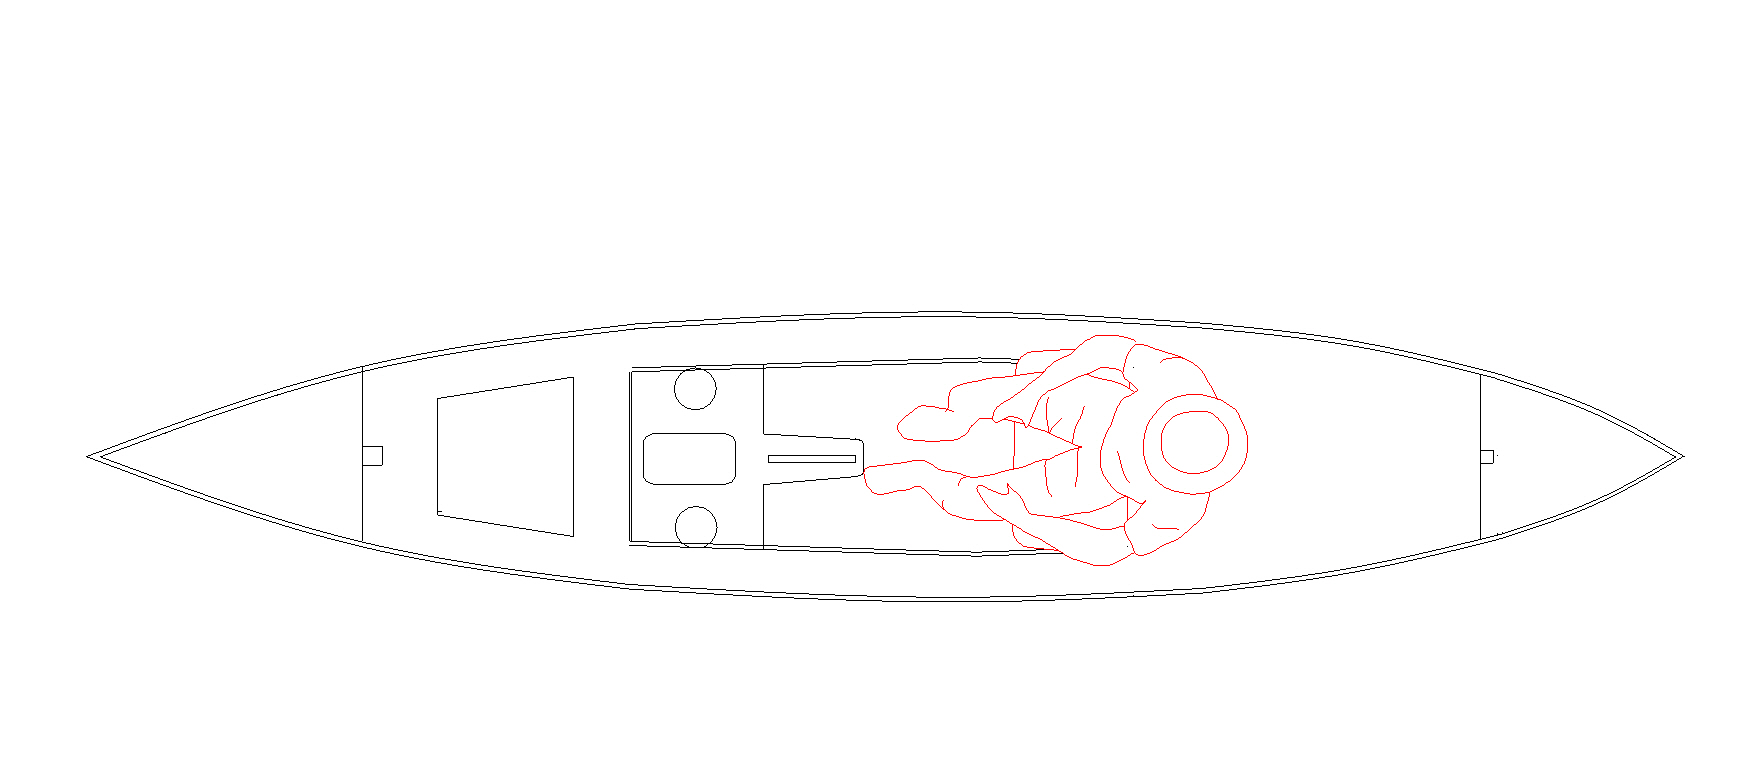 Gaia-sail-and-paddle-position.jpg